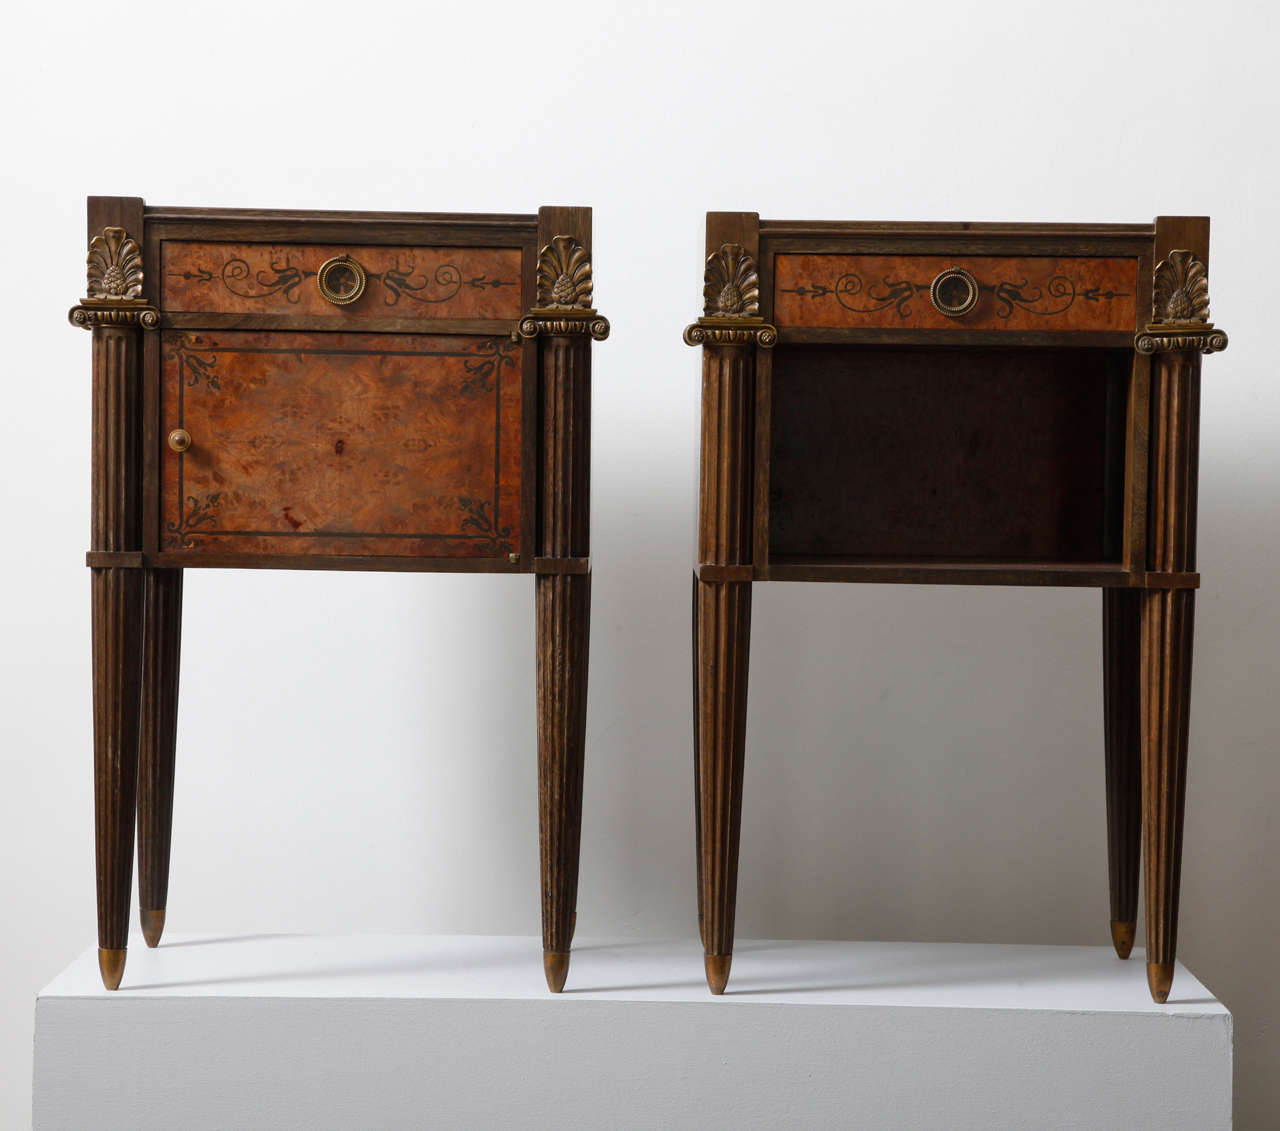 Pair of night tables in Neoclassical Art Deco style. They both have under the marble top a central drawer in burl wood decorated with floral and foliate neoclassical style marquetry, a gilt bronze circular handle in the middle and a gilt bronze